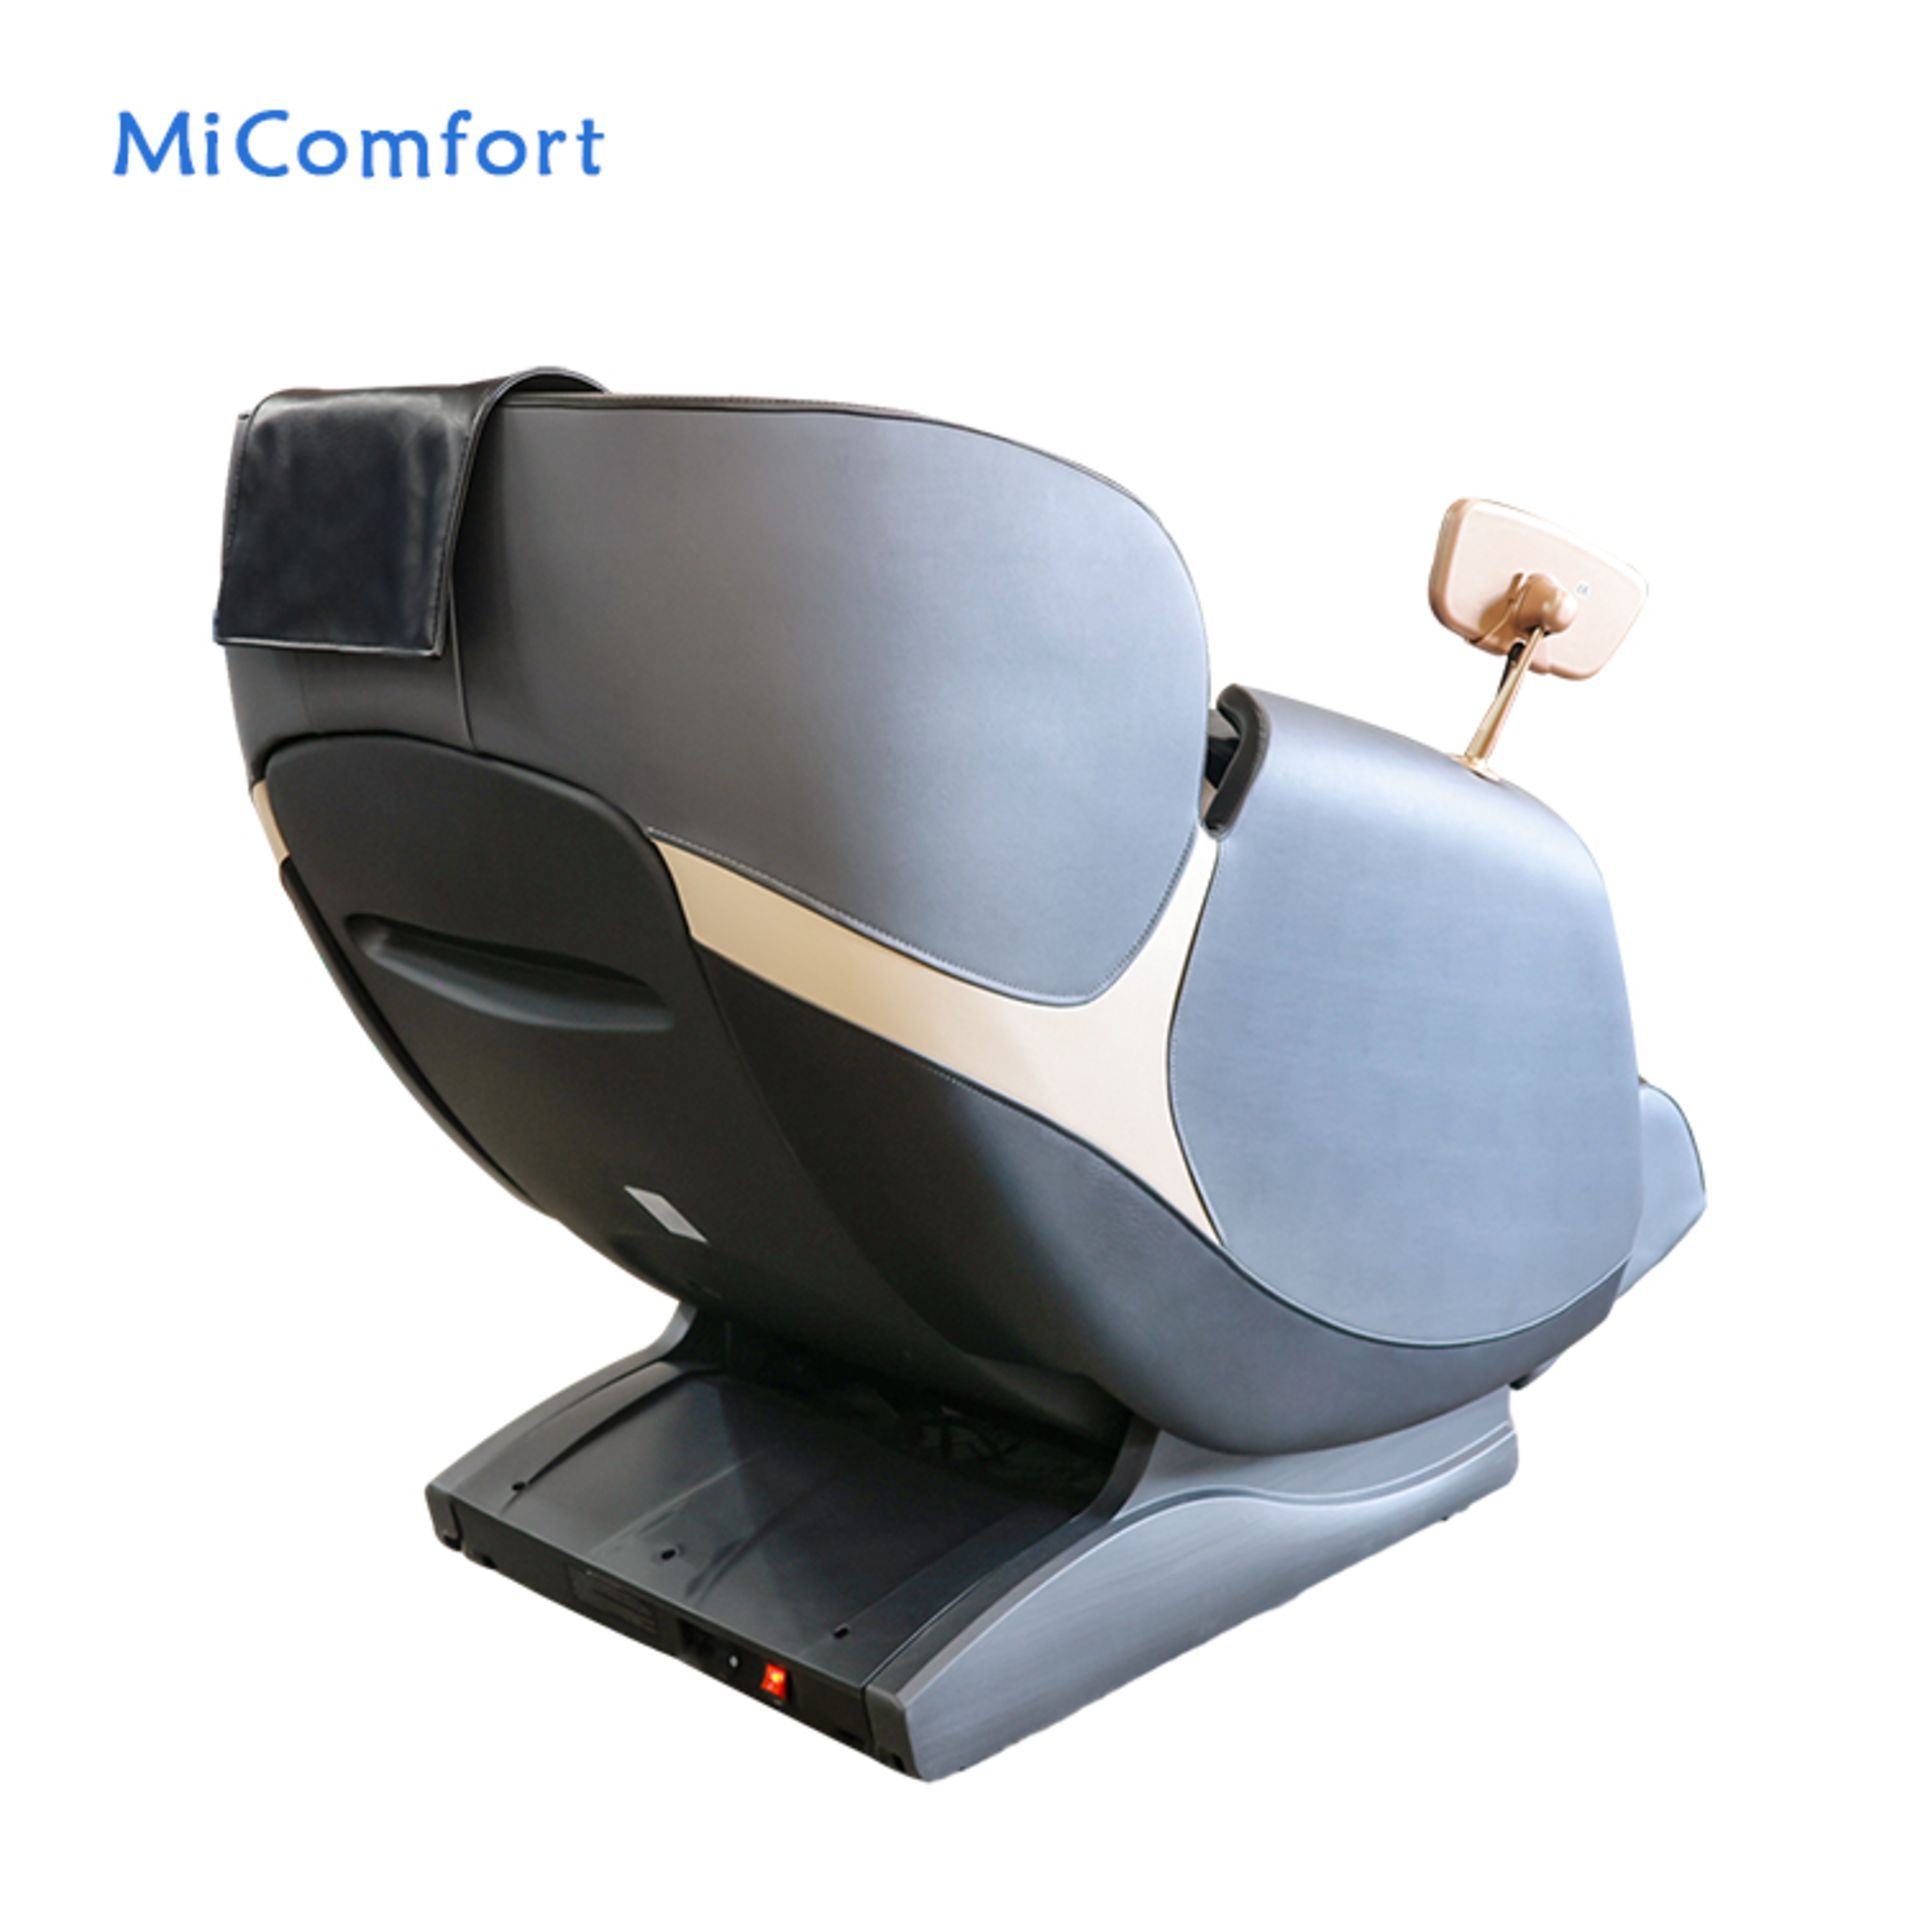 Brand New in Box Orchid Blue/Black MiComfort Full Body Massage Chair RRP £2199 *NO VAT* - Image 9 of 14